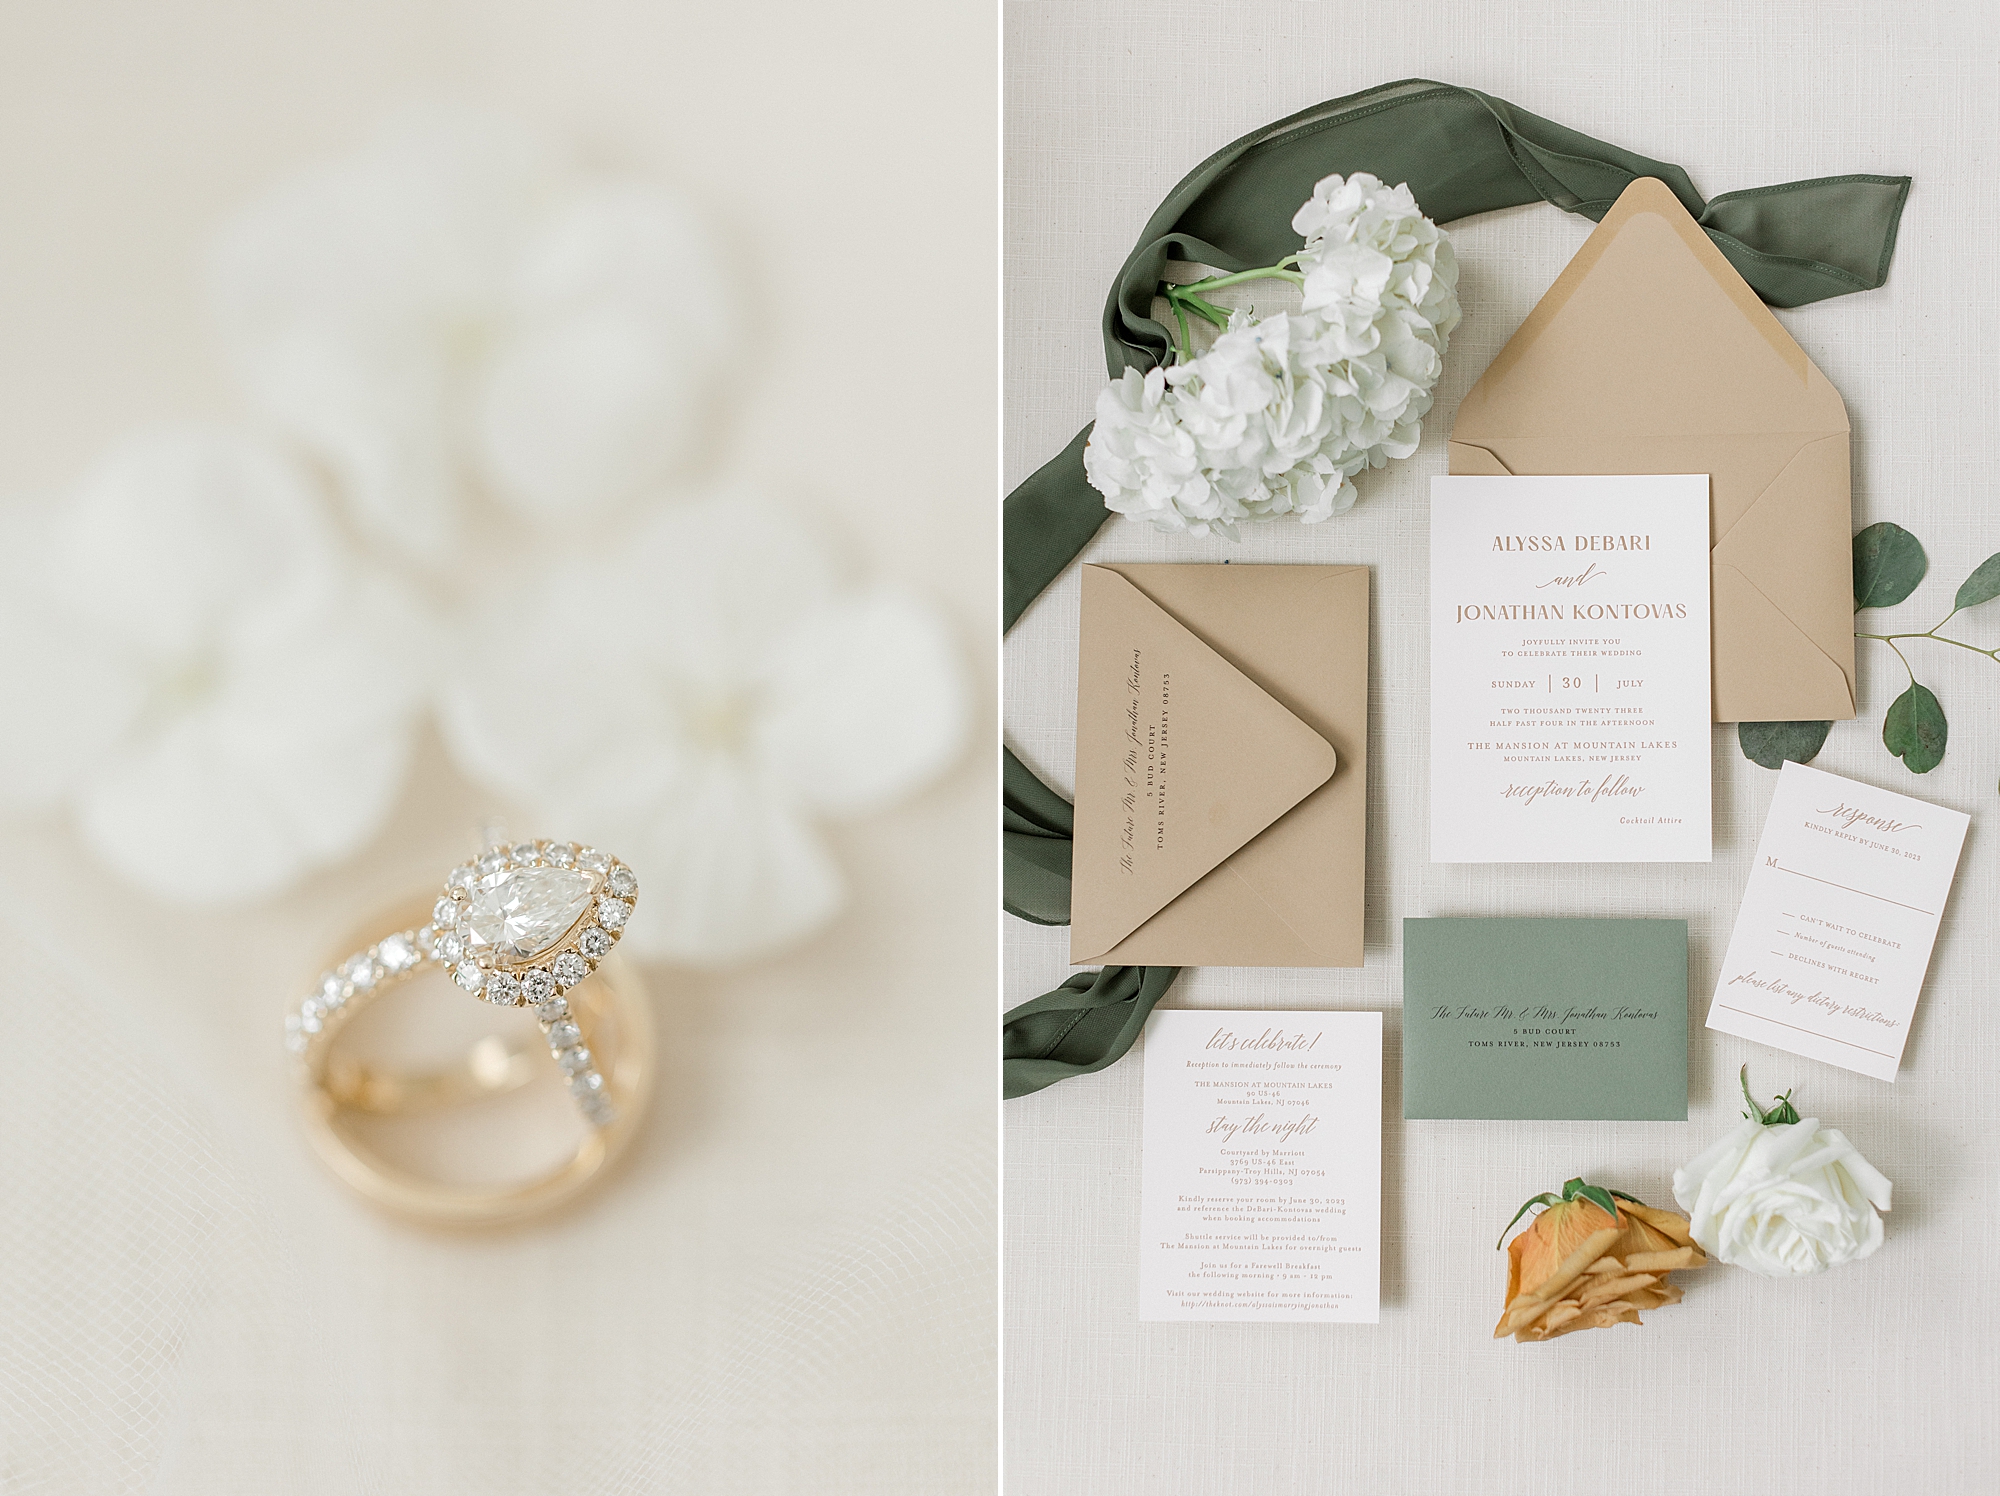 bride's rings stacked with invitation suite of tan and green